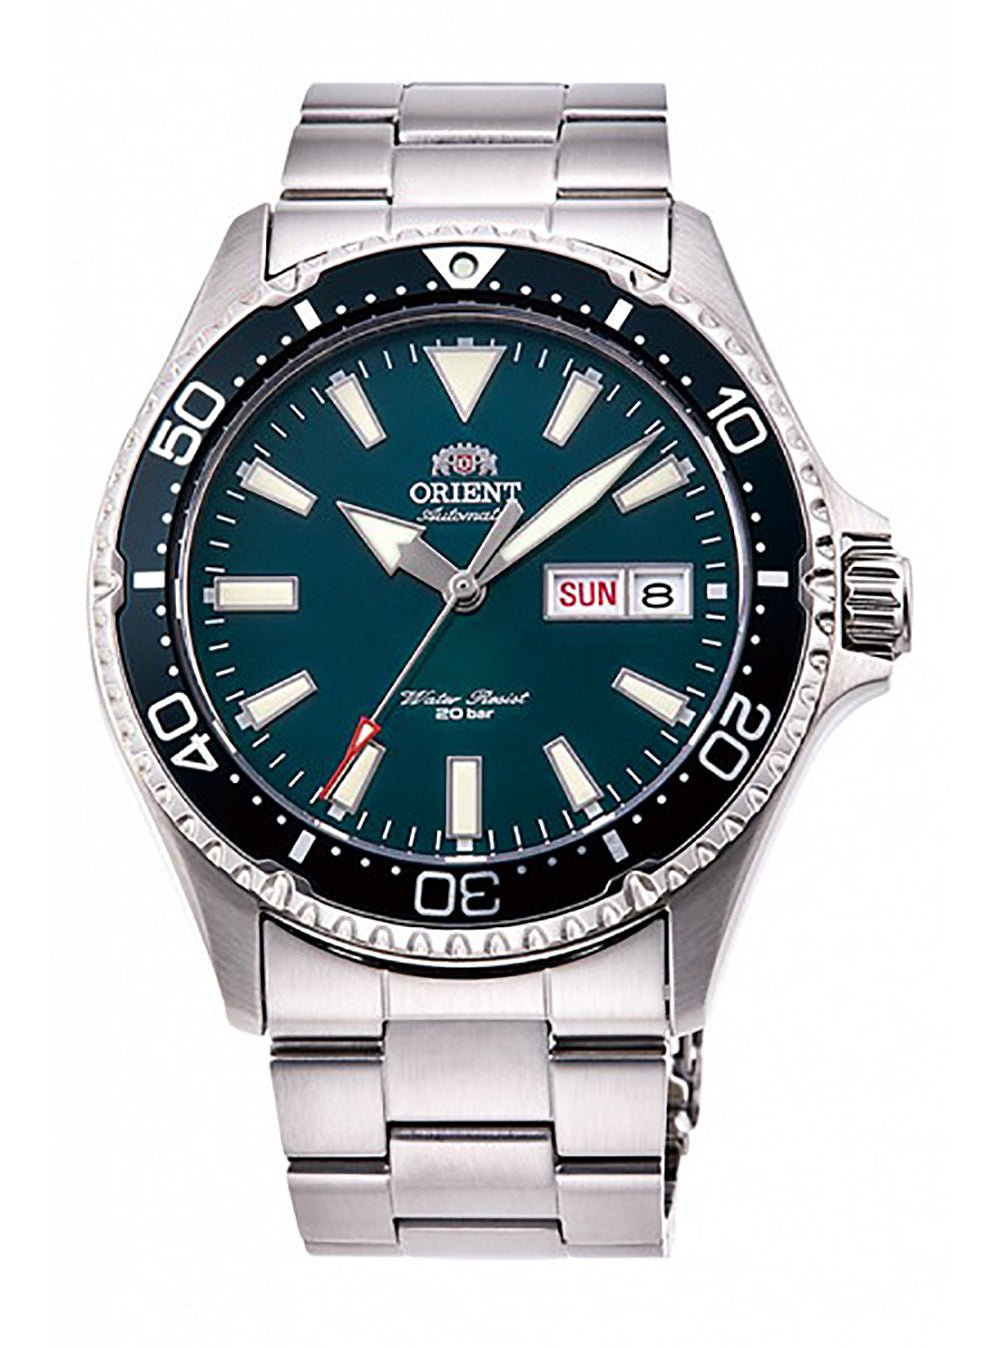 ORIENT MAKO RN-AA0816L LIMITED EDITION MADE IN JAPAN JDM – japan